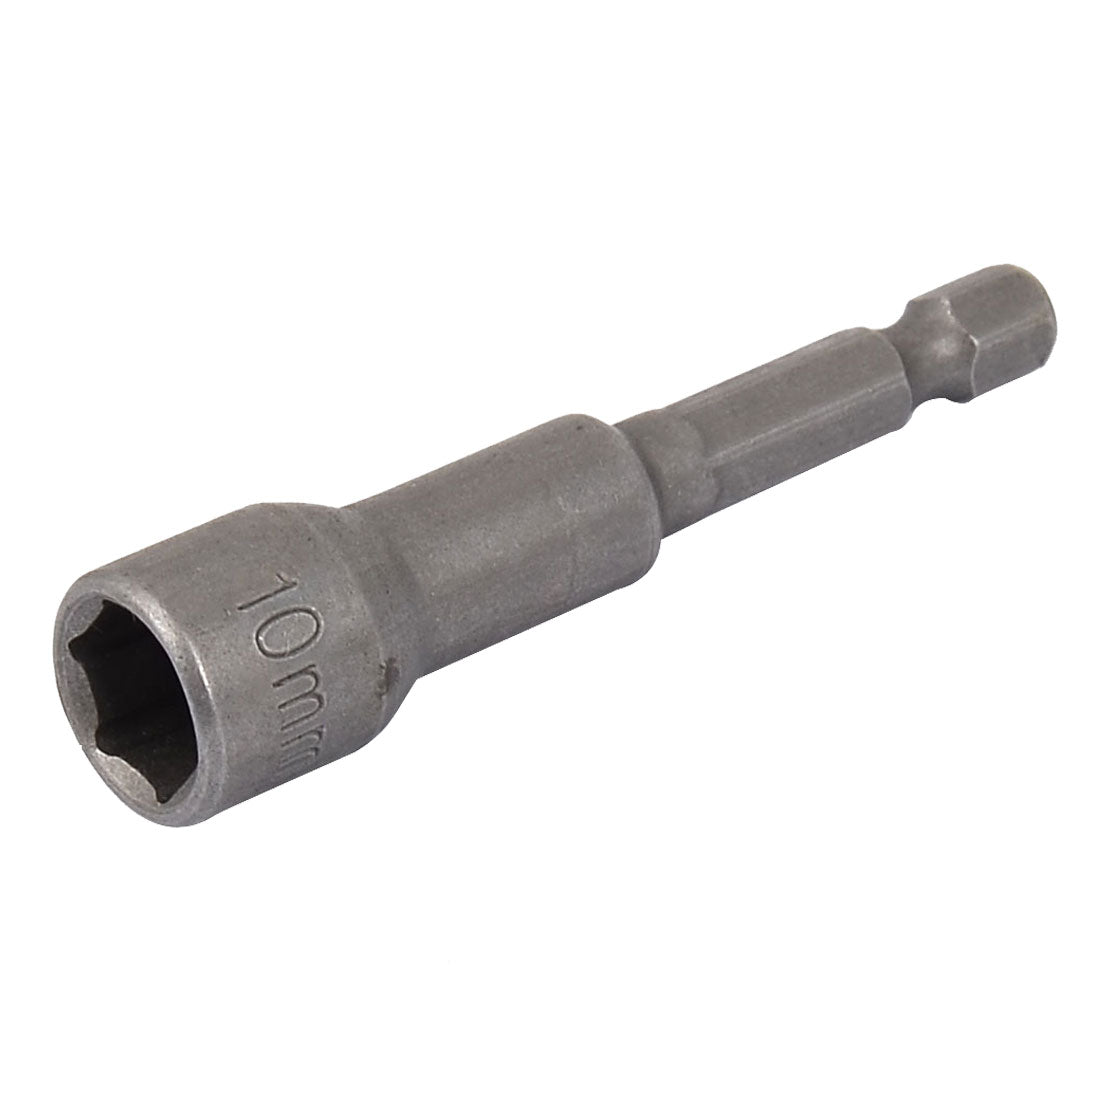 uxcell Uxcell 65mm Long 10mm Magnetic Hexagon Shank Metal Hex Nut Driver Bit Tool Gray